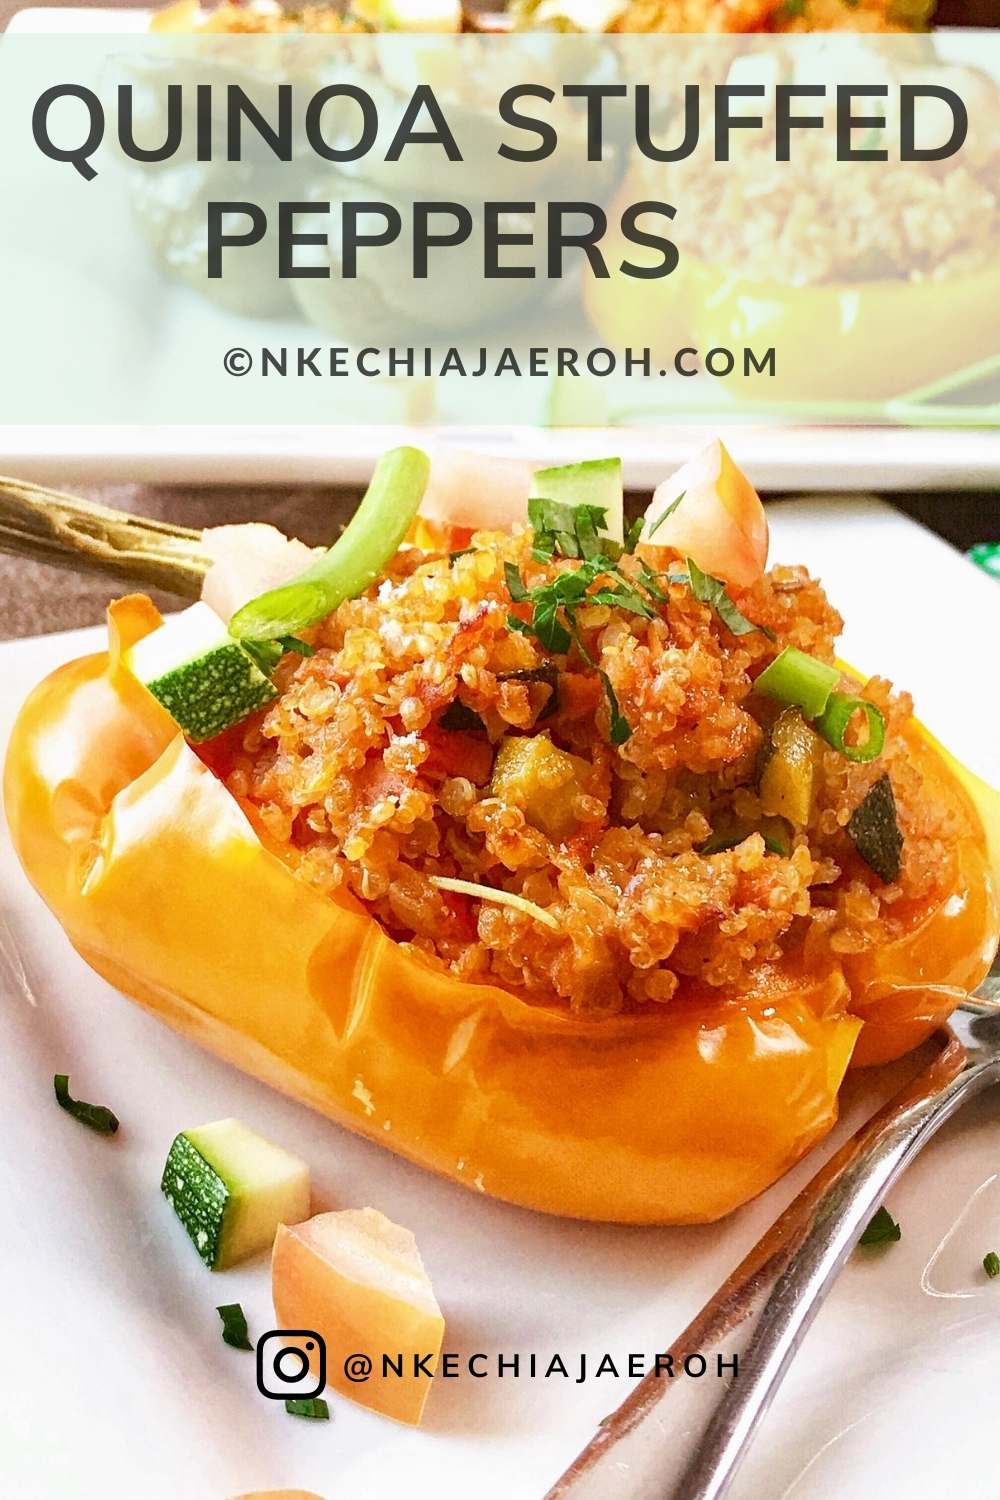 Healthy Quinoa Stuffed Peppers – vegetarian, gluten-free, low-carb, nutritious, and insanely delicious. From the superfood quinoa to the health-improving bell peppers, tomatoes, zucchini, etc., this recipe is sure to become your favorite. Talk about healthy lunch or dinner; this baked vegetarian stuffed pepper recipe will not disappoint. You can easily make this vegan by forgoing the cheese or use cashew cheese. 